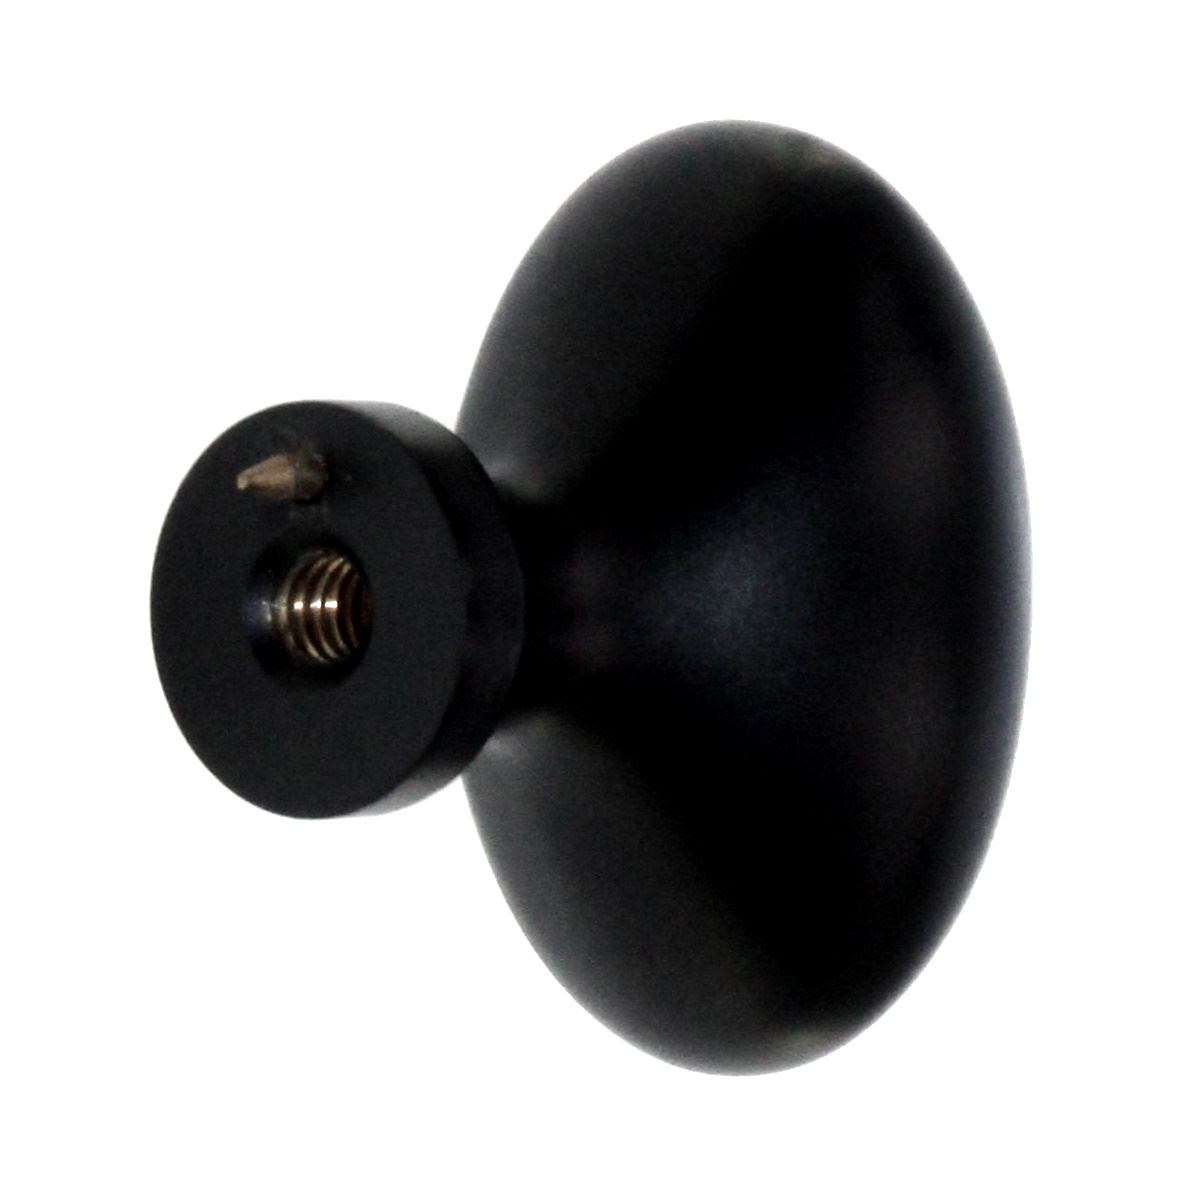 Schaub And Company Country 1 3/8" Solid Brass Cabinet Knob Flat Black 719-FB